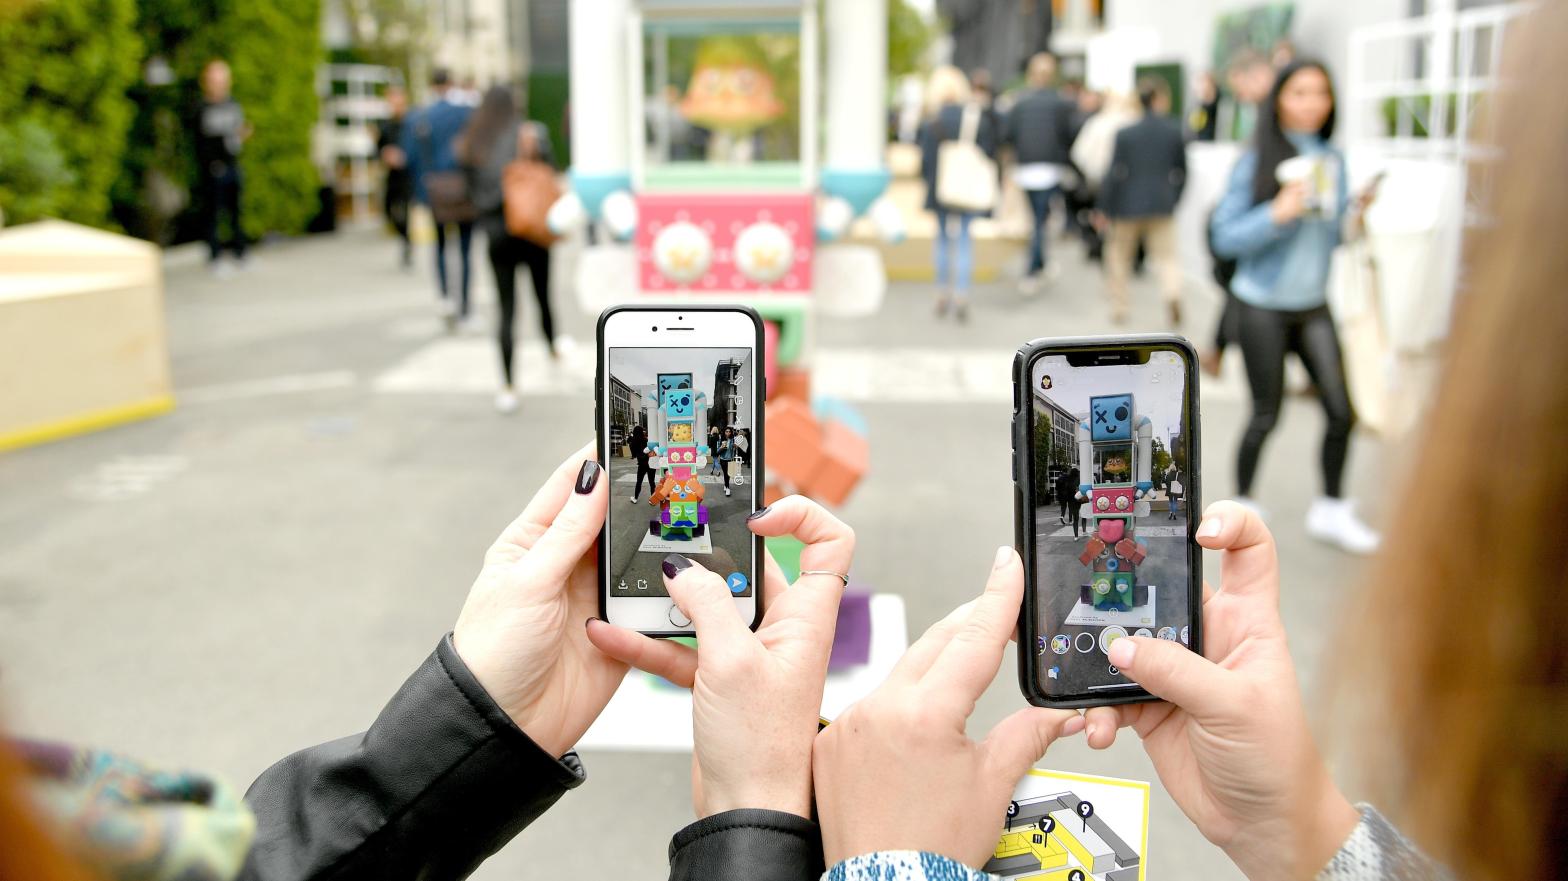 Snapchat's augmented reality filters are a major draw for users of the social media app. (Image: Neilson Barnard, Getty Images)